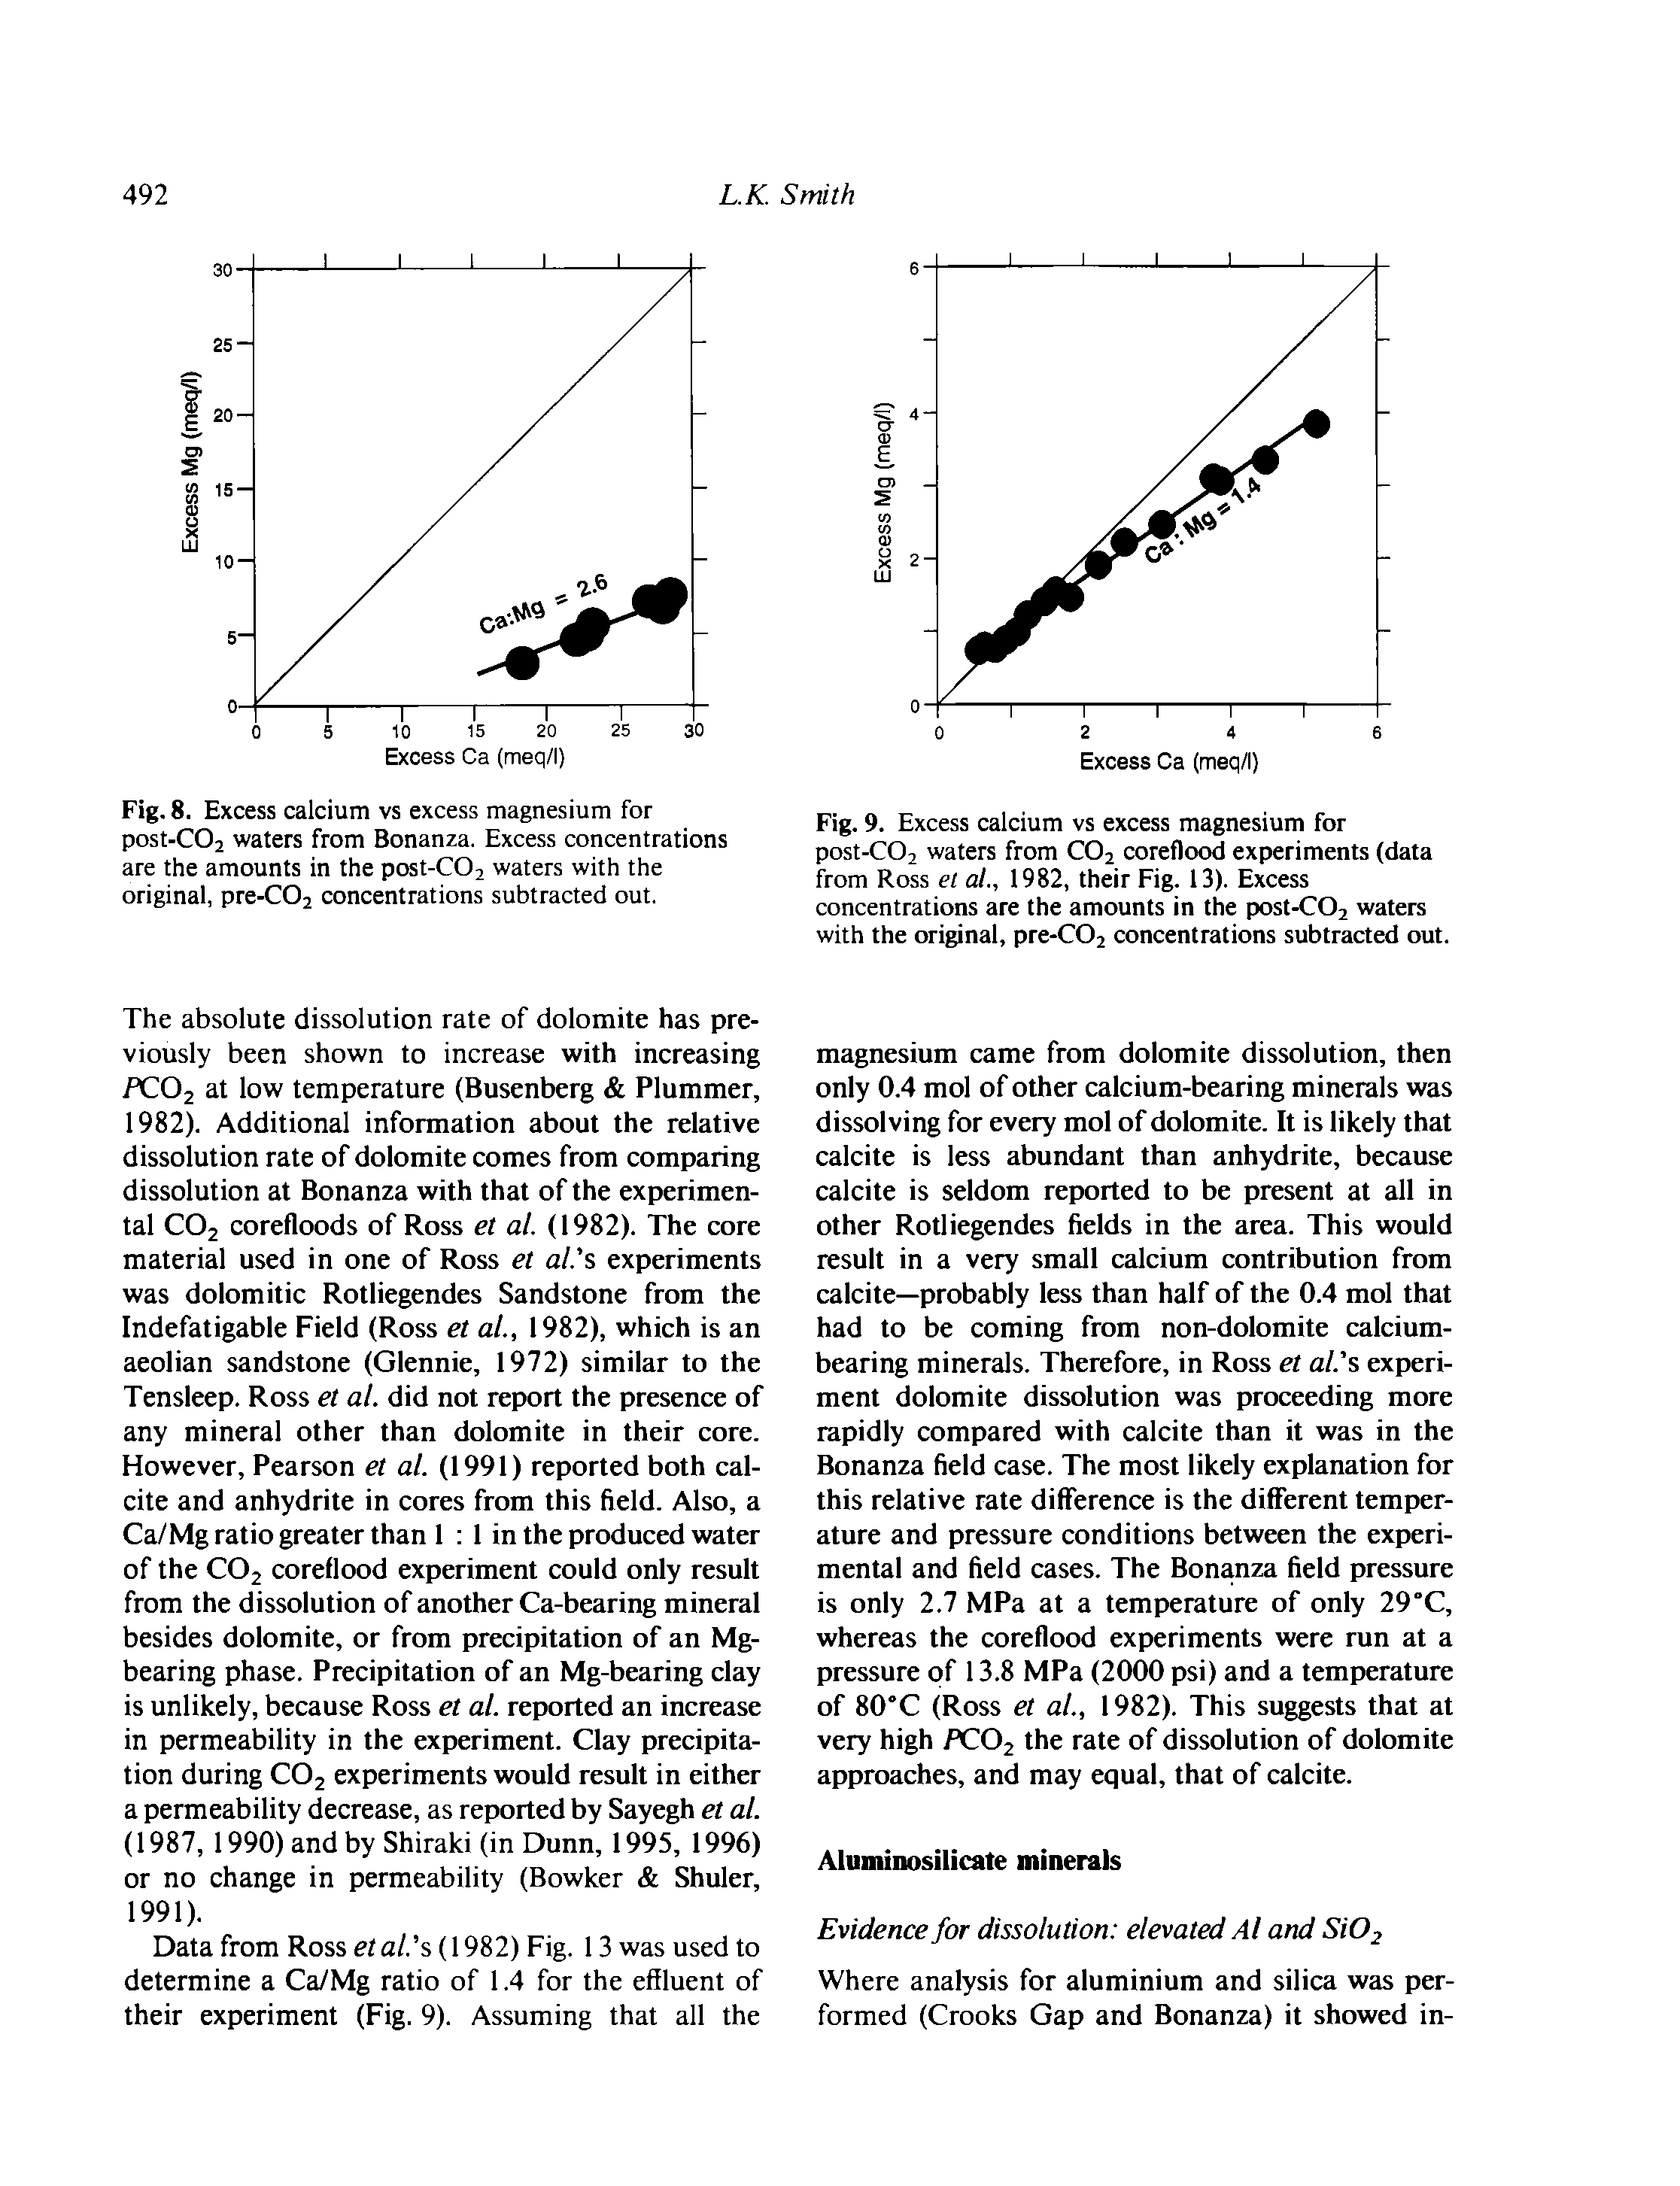 Fig. 9. Excess calcium vs excess magnesium for post-C02 waters from CO2 coreflood experiments (data from Ross el at., 1982, their Fig. 13). Excess concentrations are the amounts in the post-COj waters with the original, pre-C02 concentrations subtracted out.